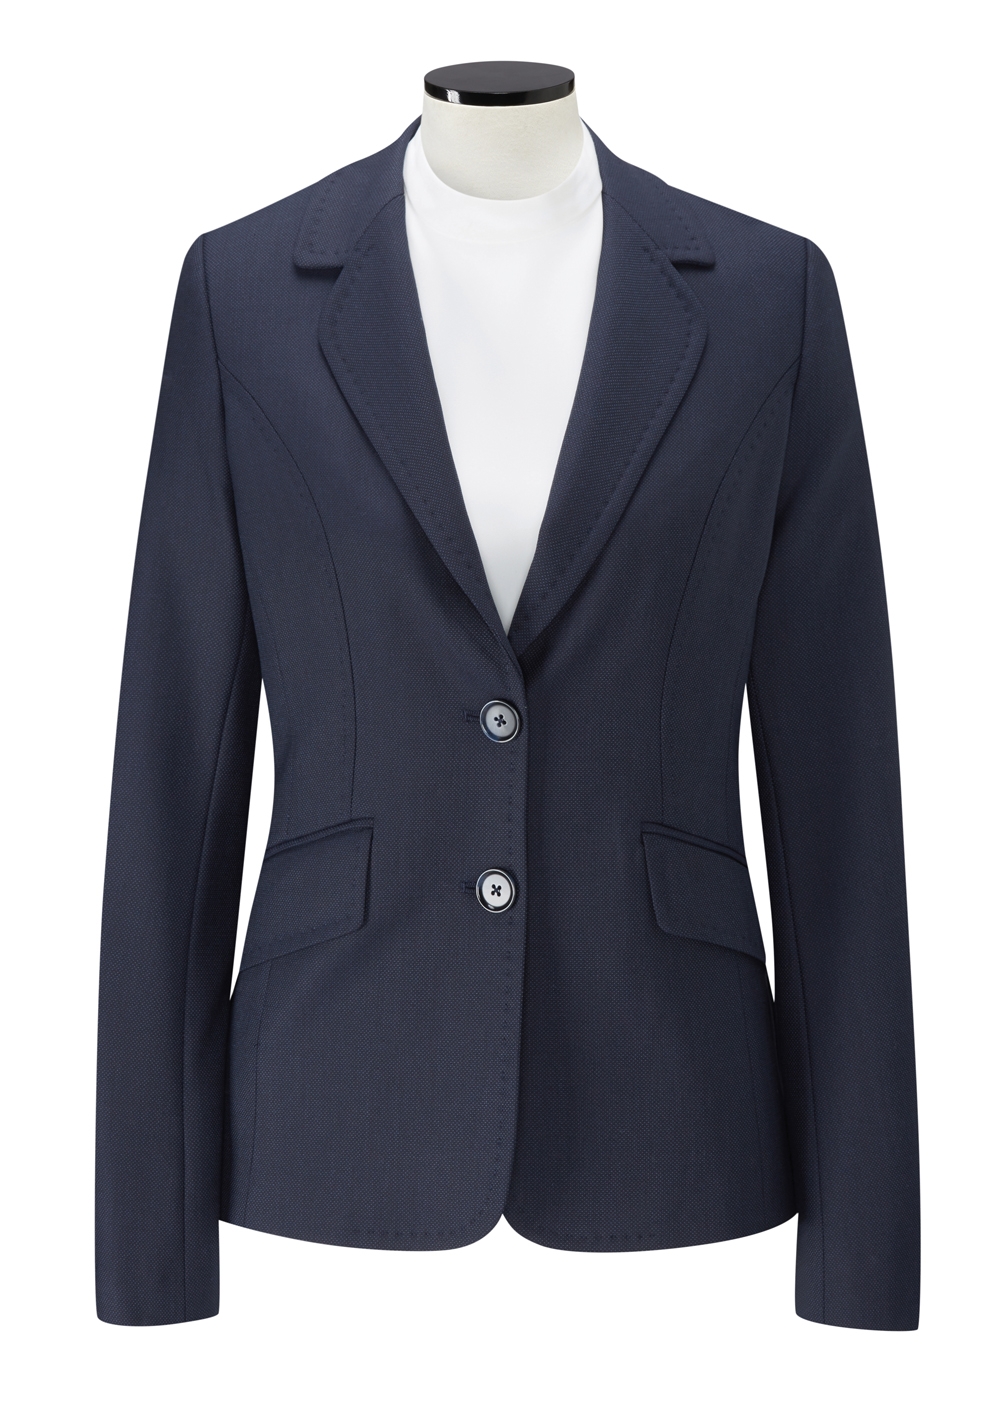 Clubclass New Envee Collection J8000 Smyth Tailored Fit Ladies Jacket-0